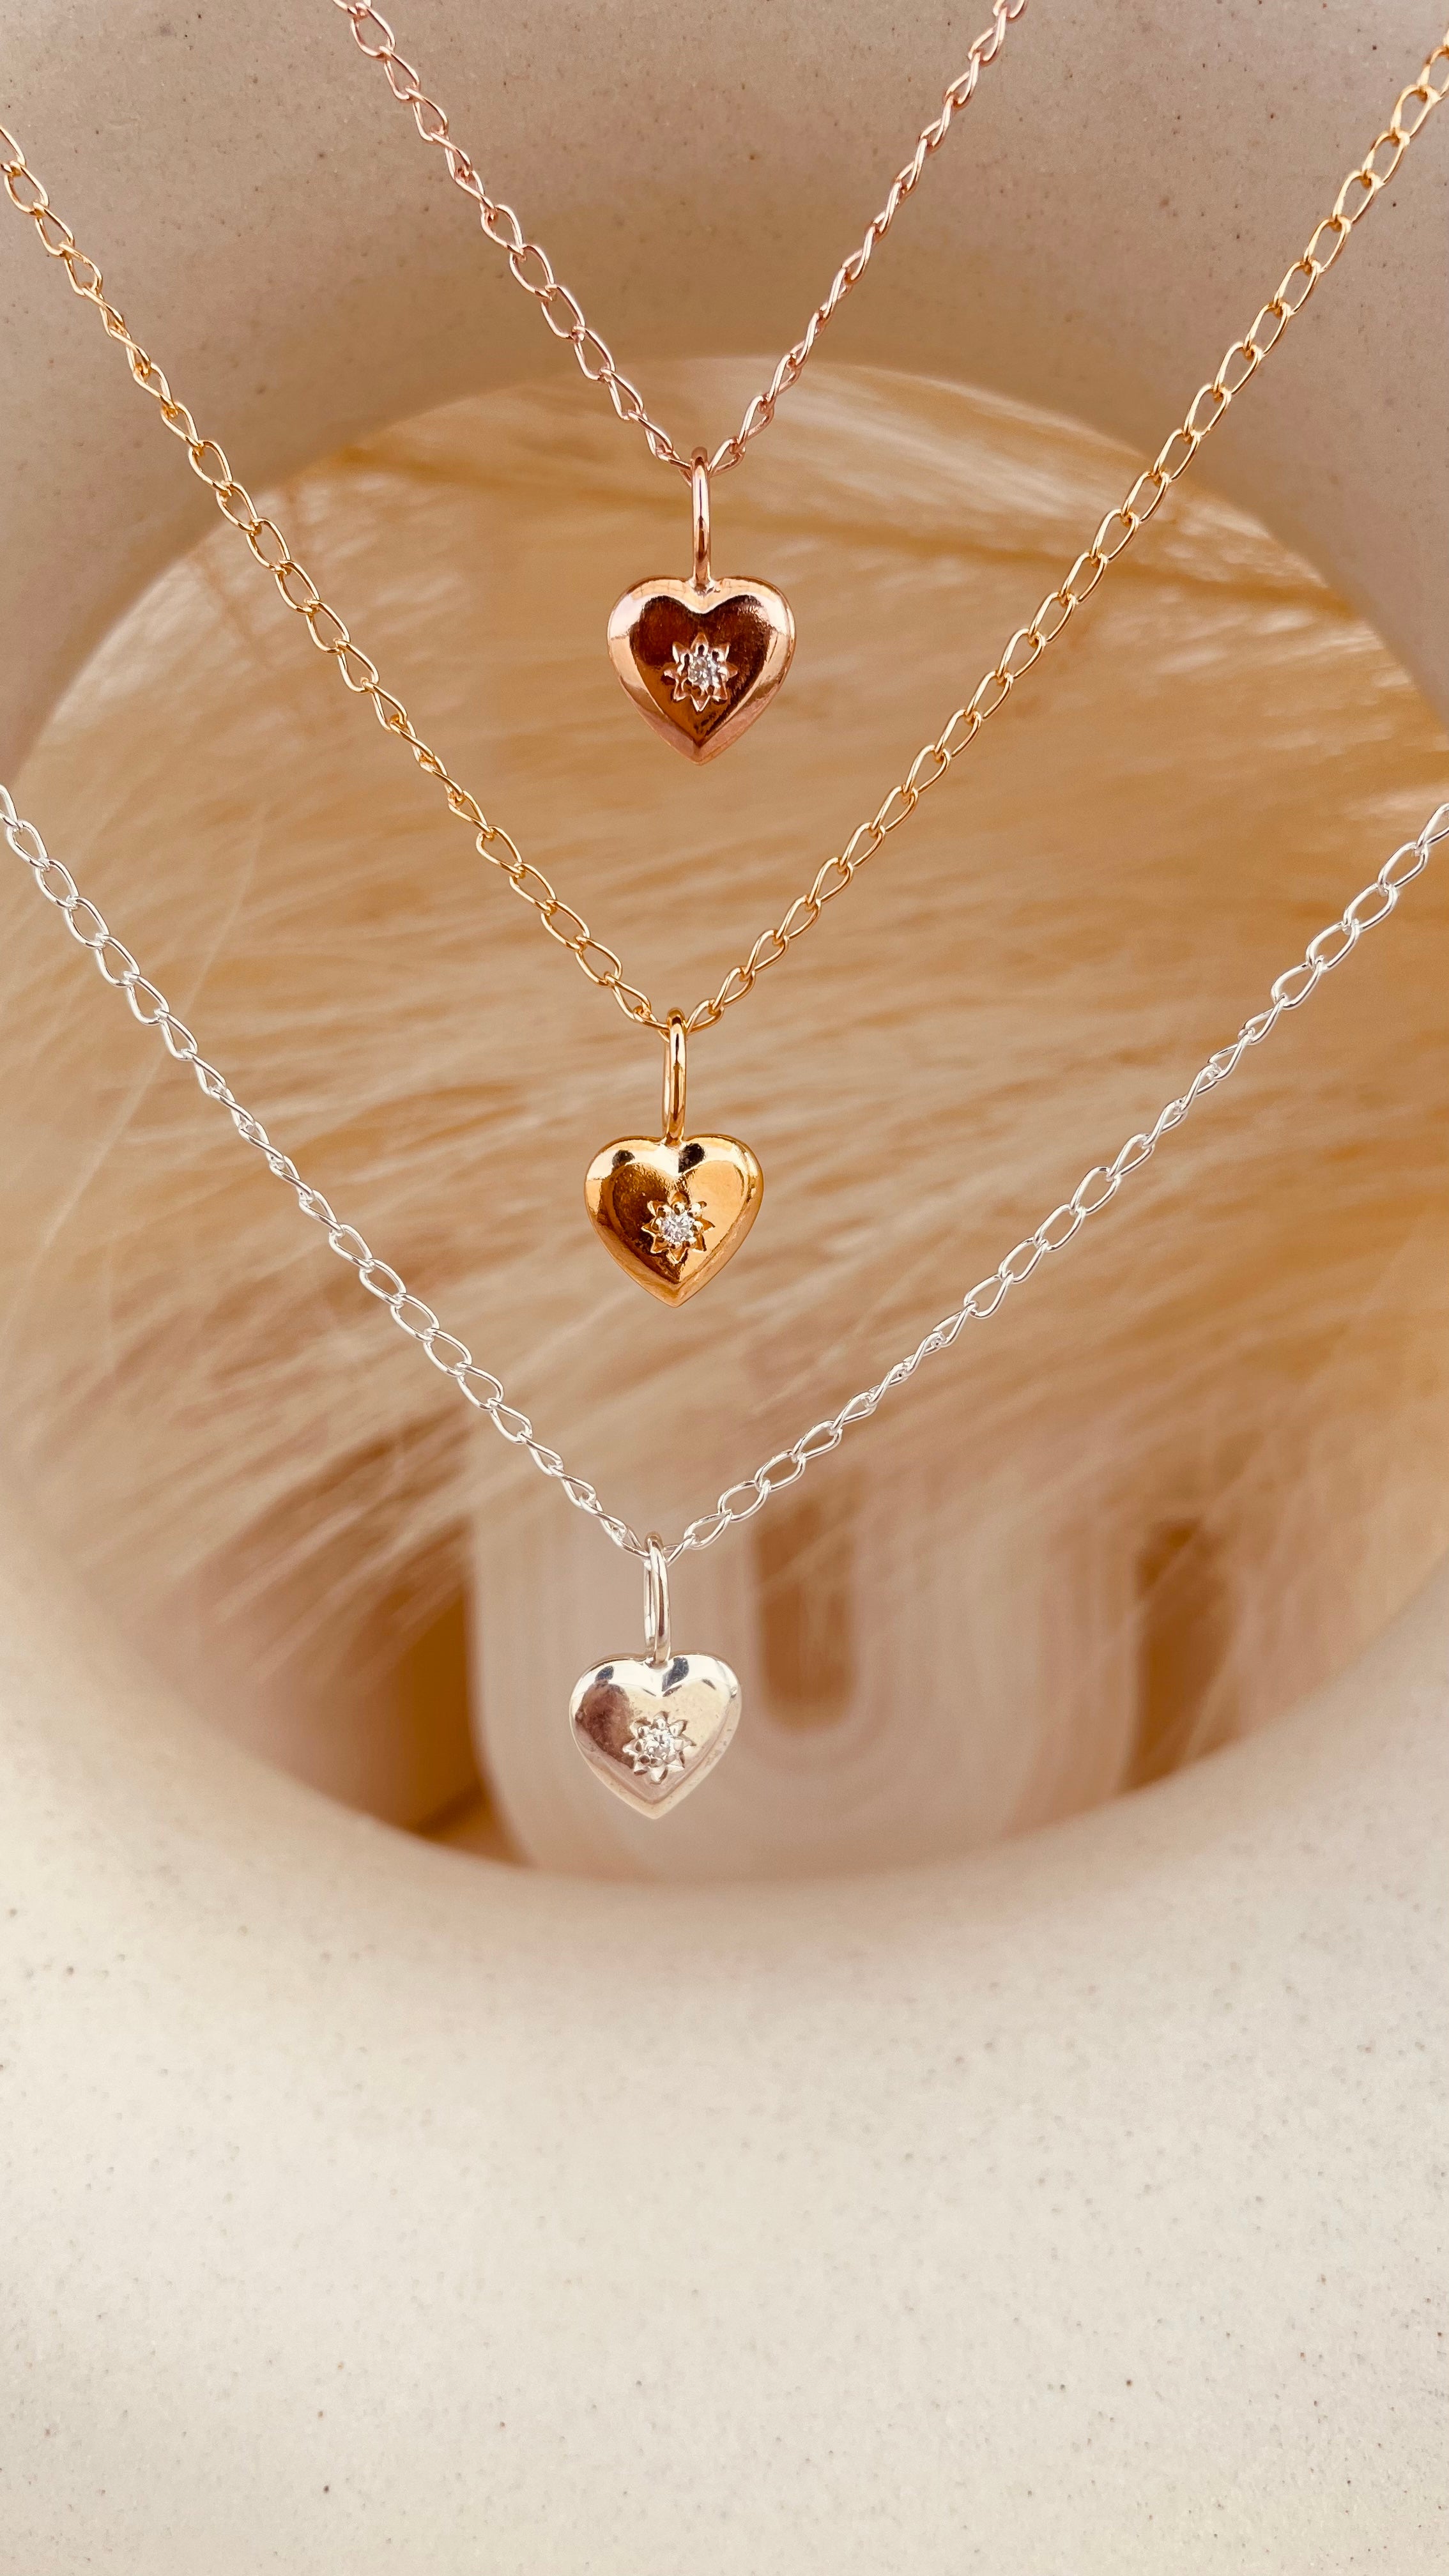 Dainty Vintage Heart Necklace with Cable Chain - Octonov 